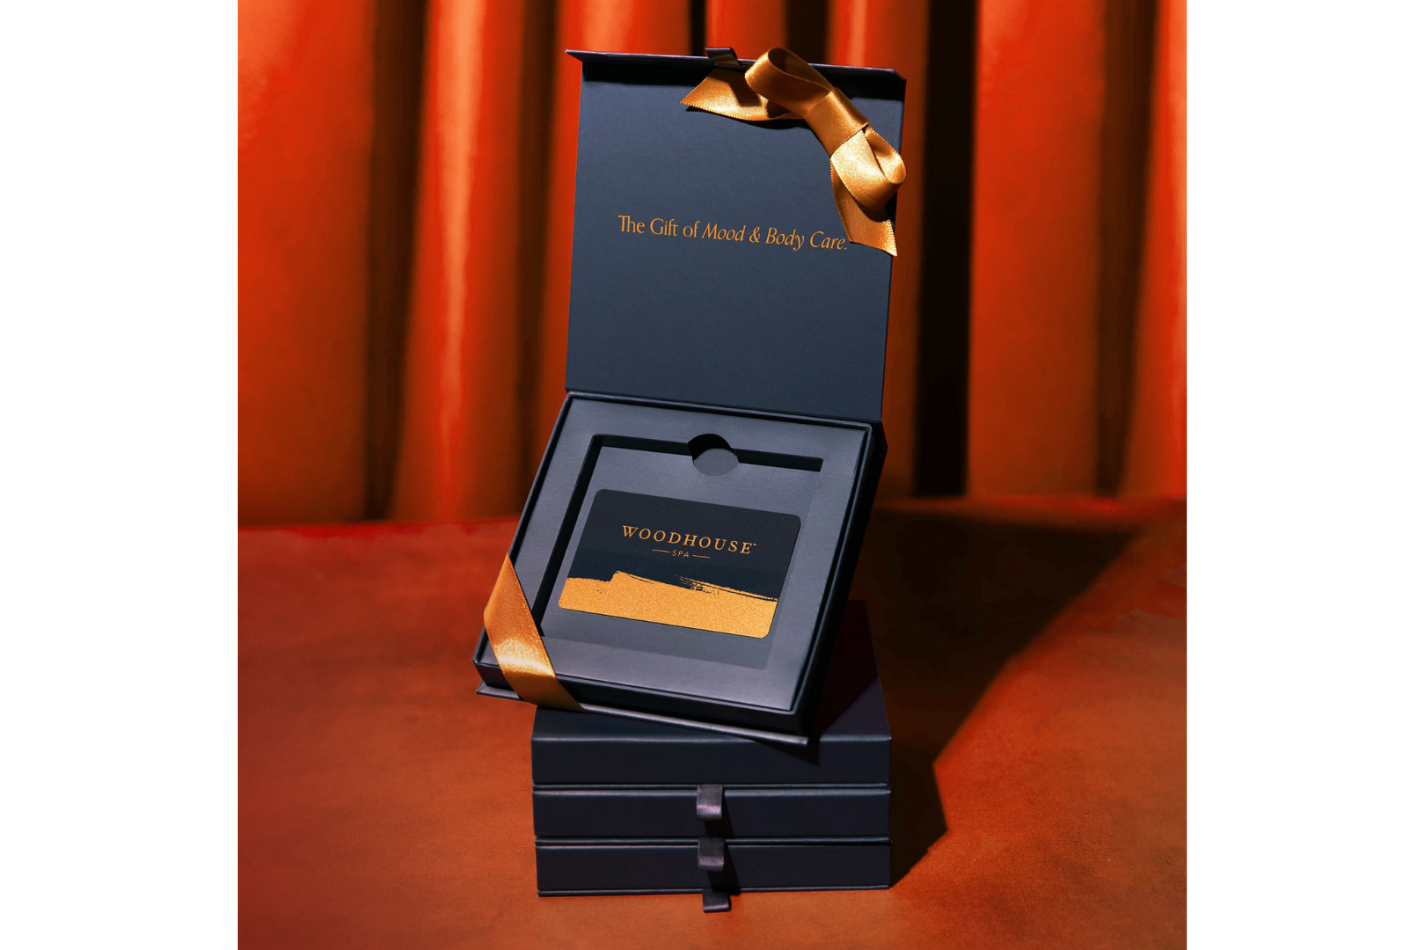 Share the luxury with the ultimate gift - a personalized spa experience tailored to them. Give a Woodhouse Spa gift card.